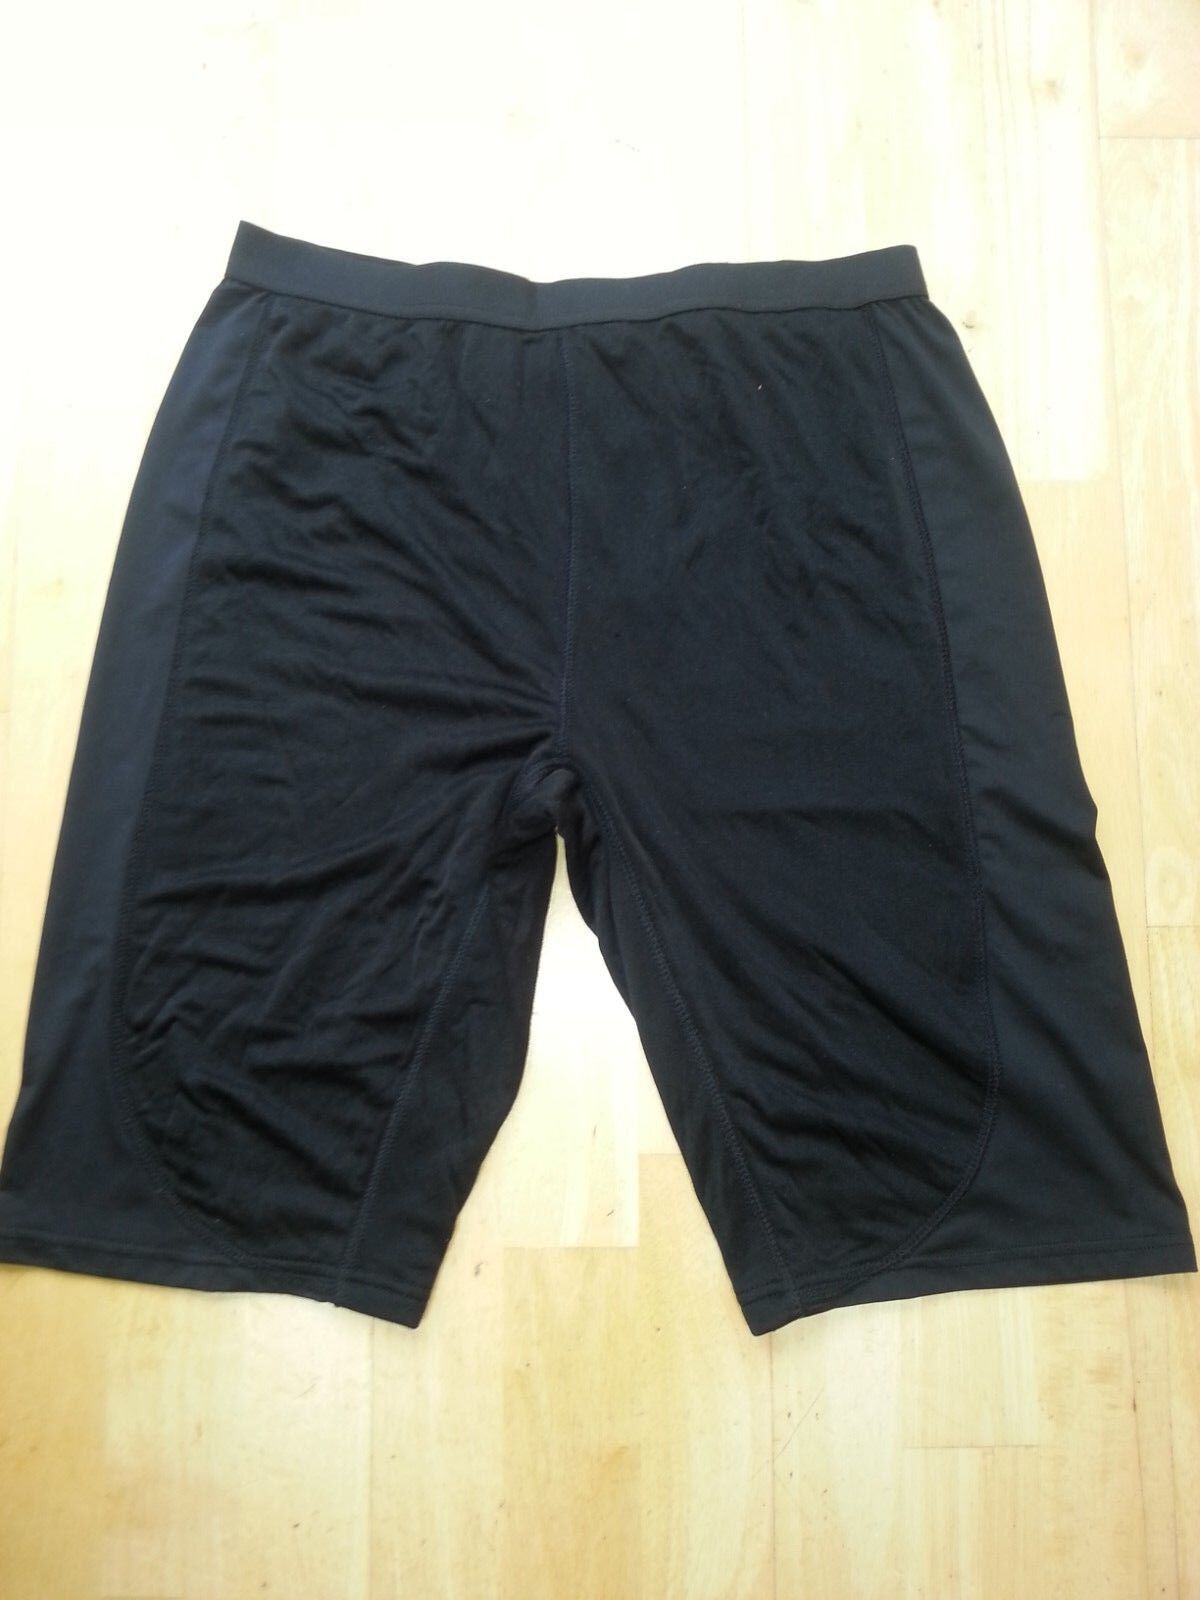 Pelvic Protection Anti Microbial Black Under Wear / Boxer Shorts, for cycling 